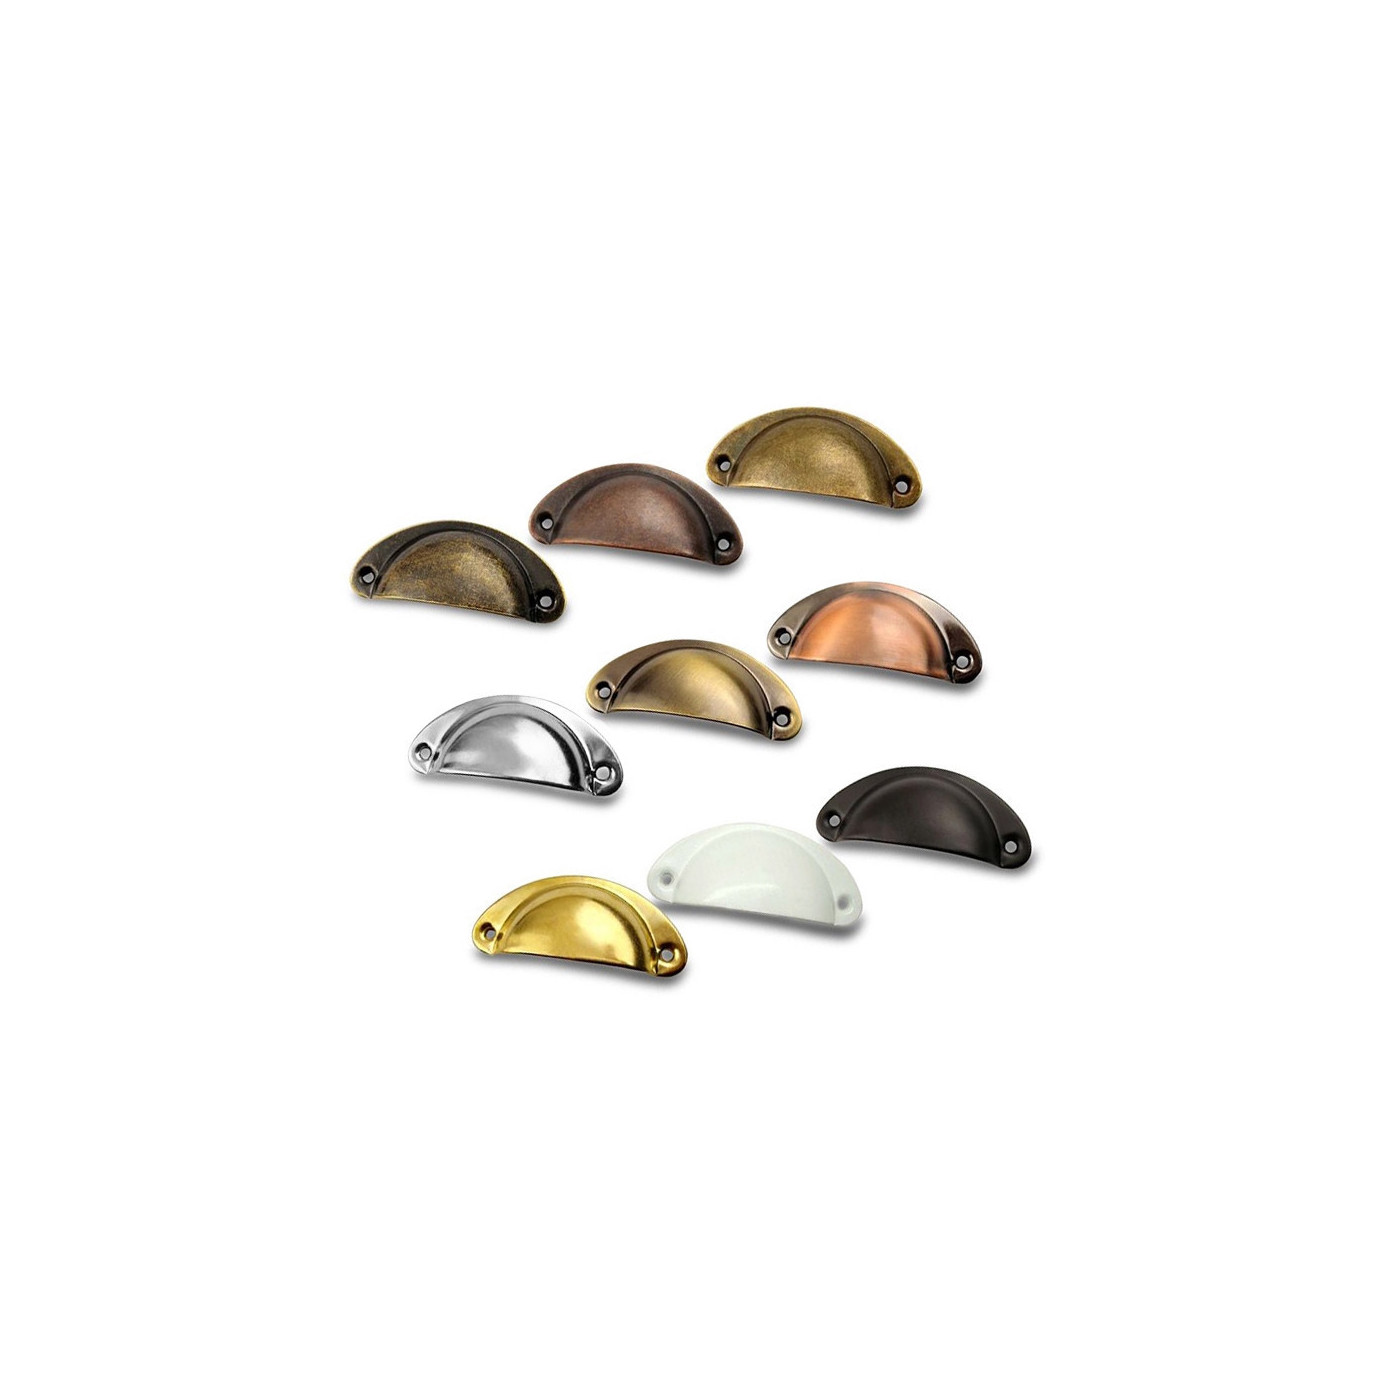 Set of 10 shell shaped handles for furniture: color 2